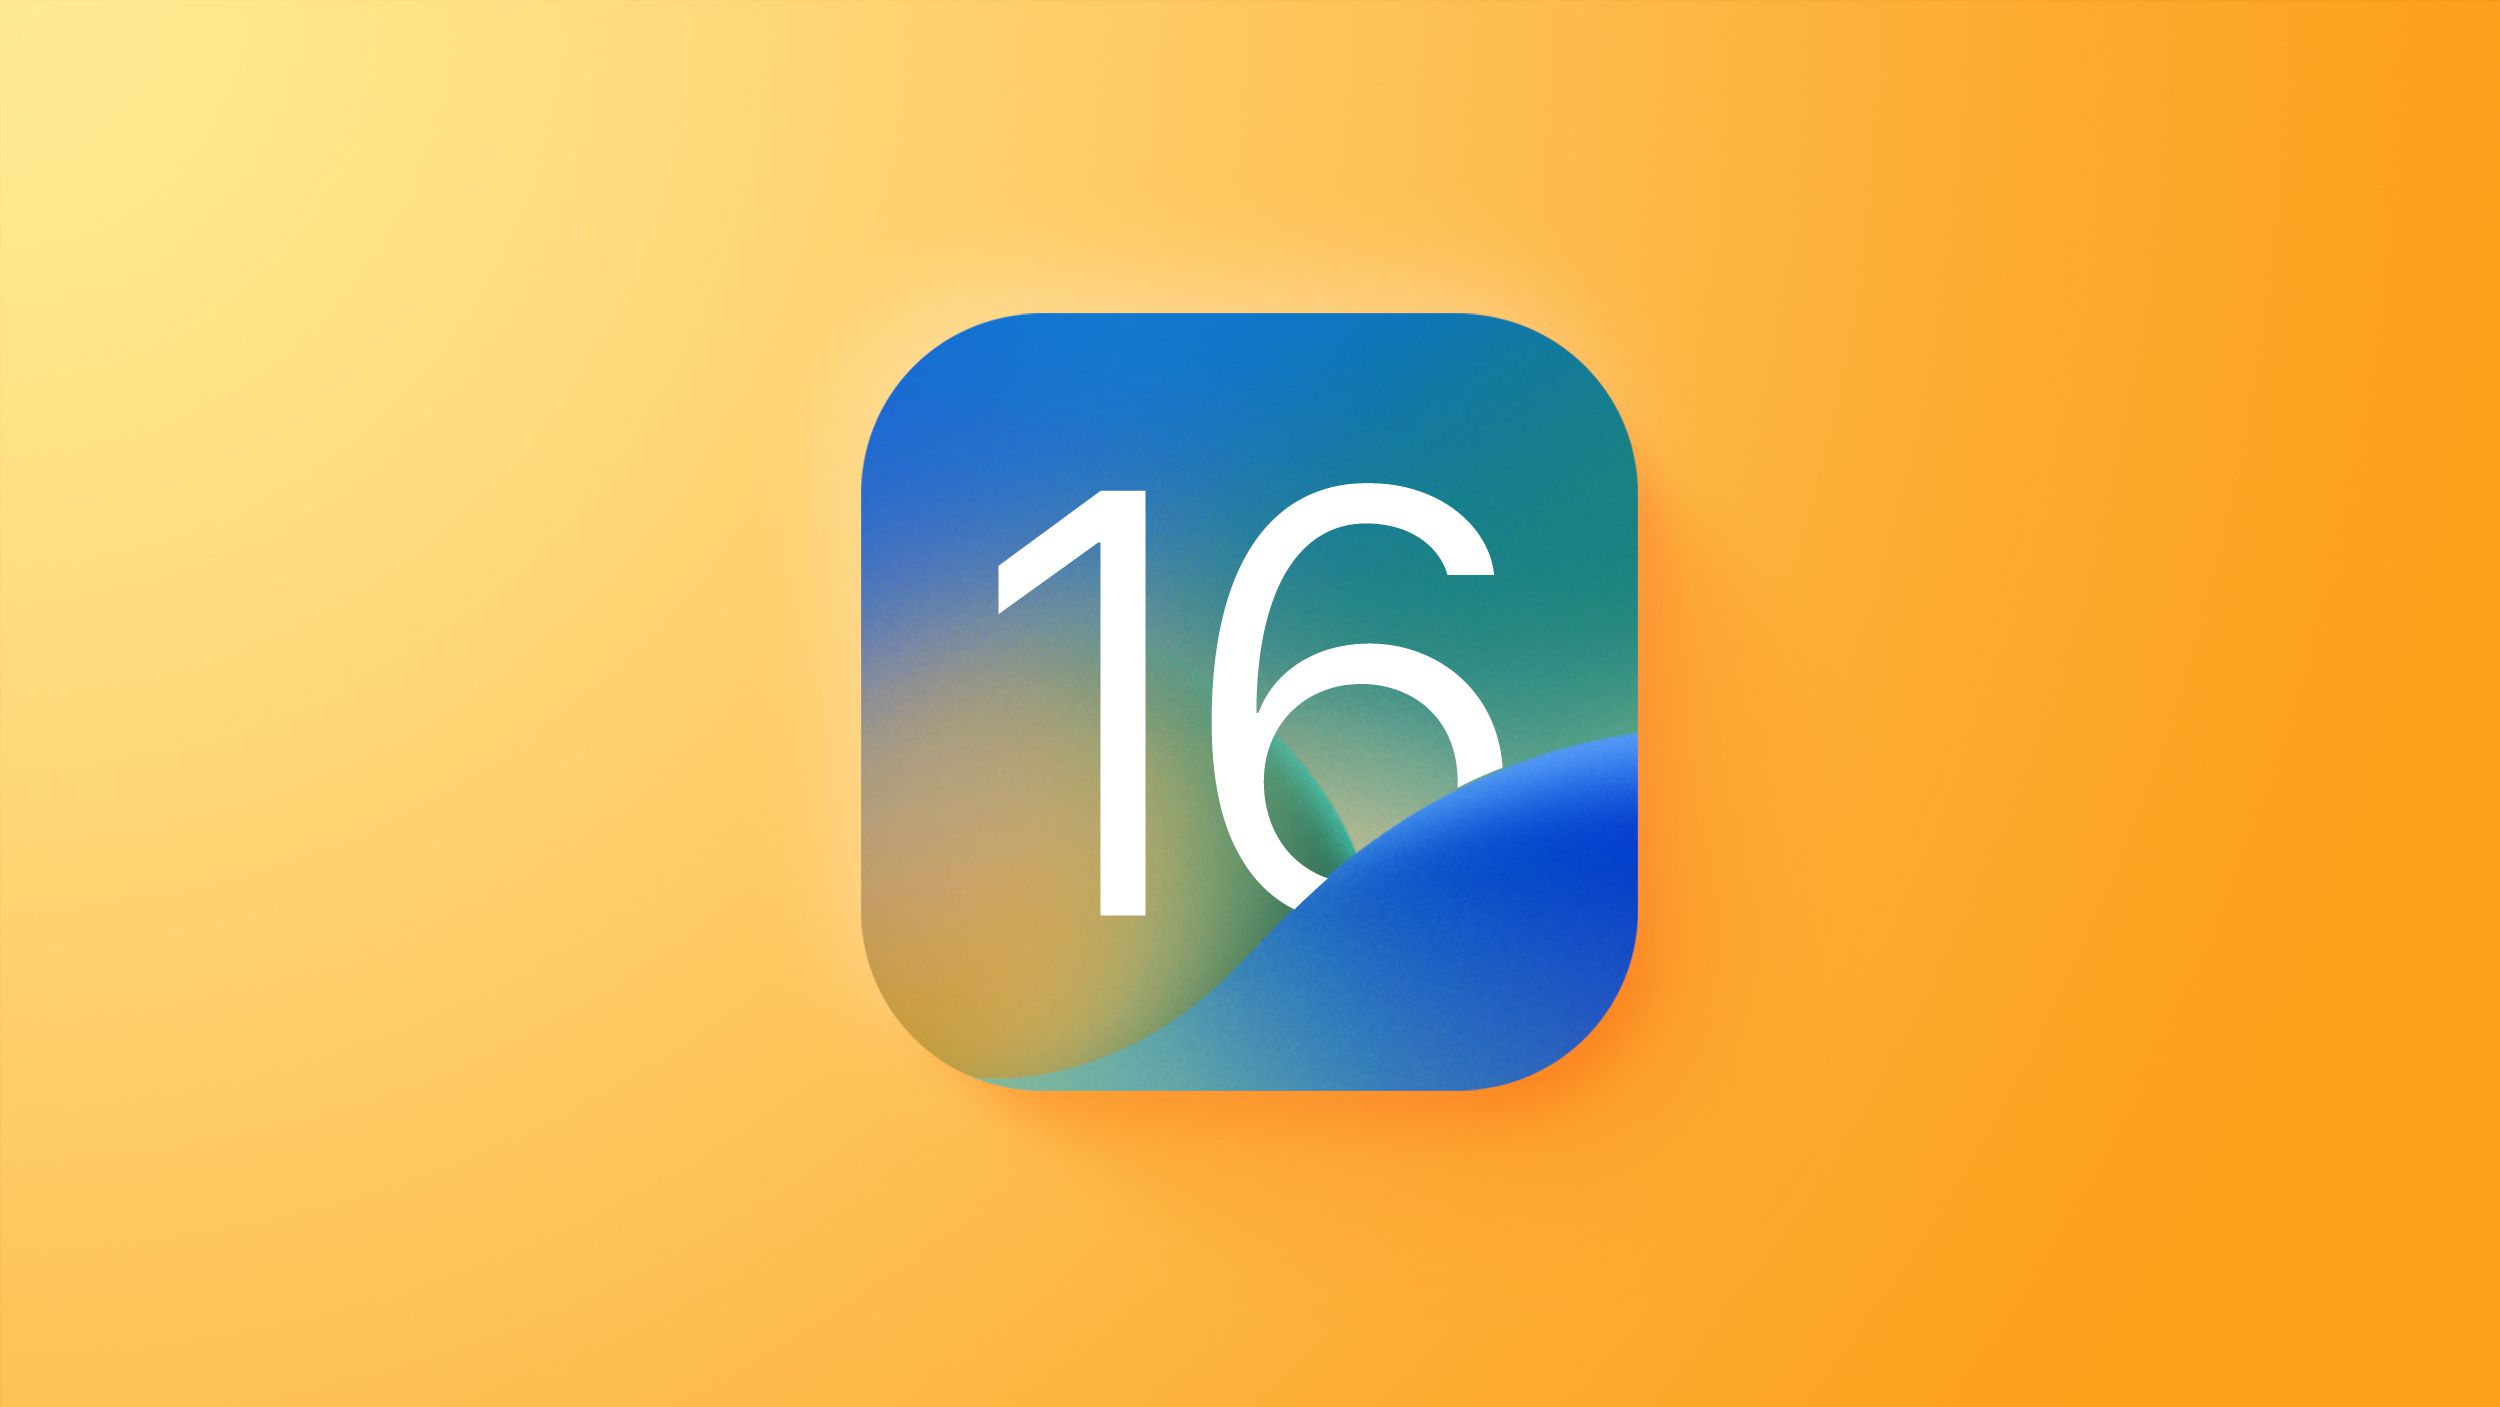 10 New iOS 16 Features Coming Later This Year - MacRumors